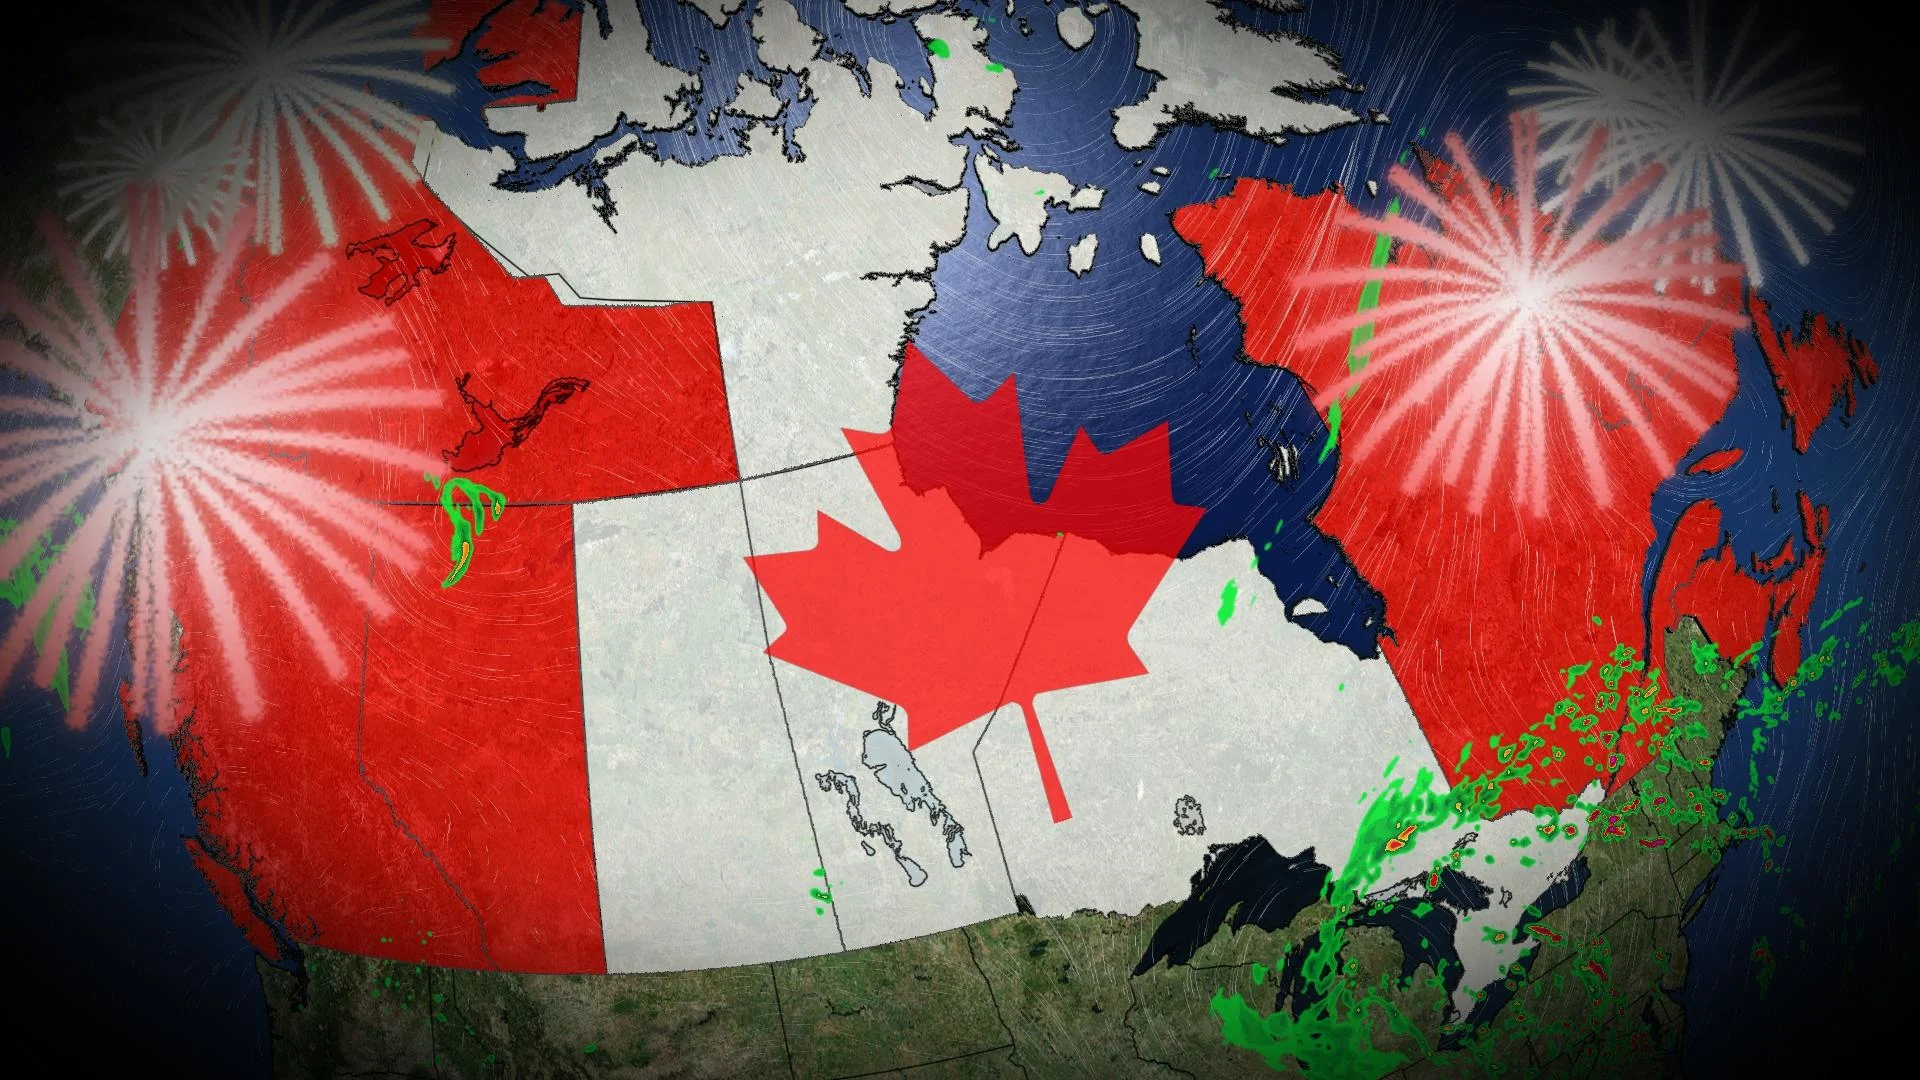 Forecast calls for flexible plans for your long Canada Day weekend